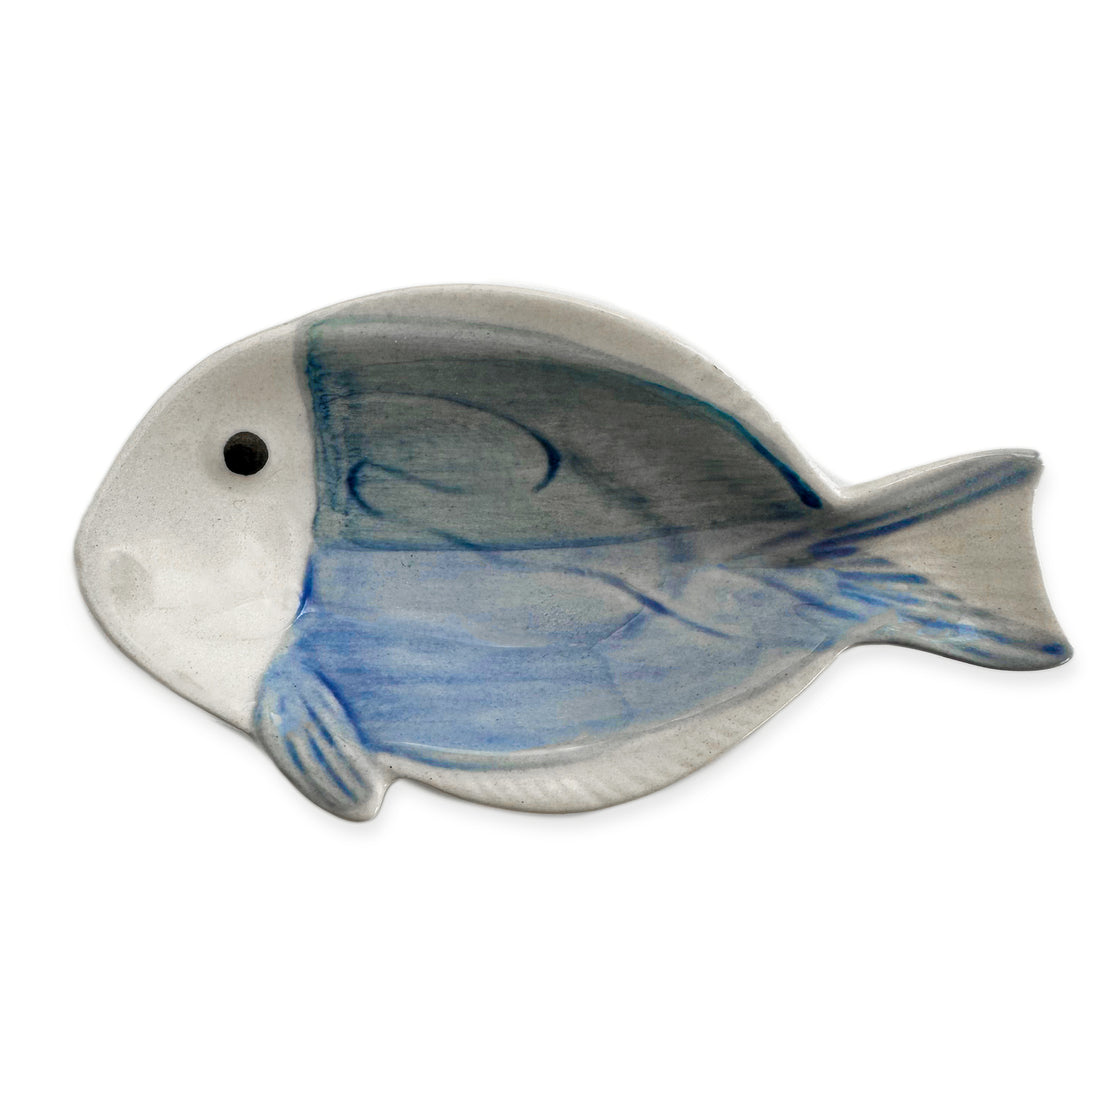  Mini Fish Plates in shades of white and blue by rengora